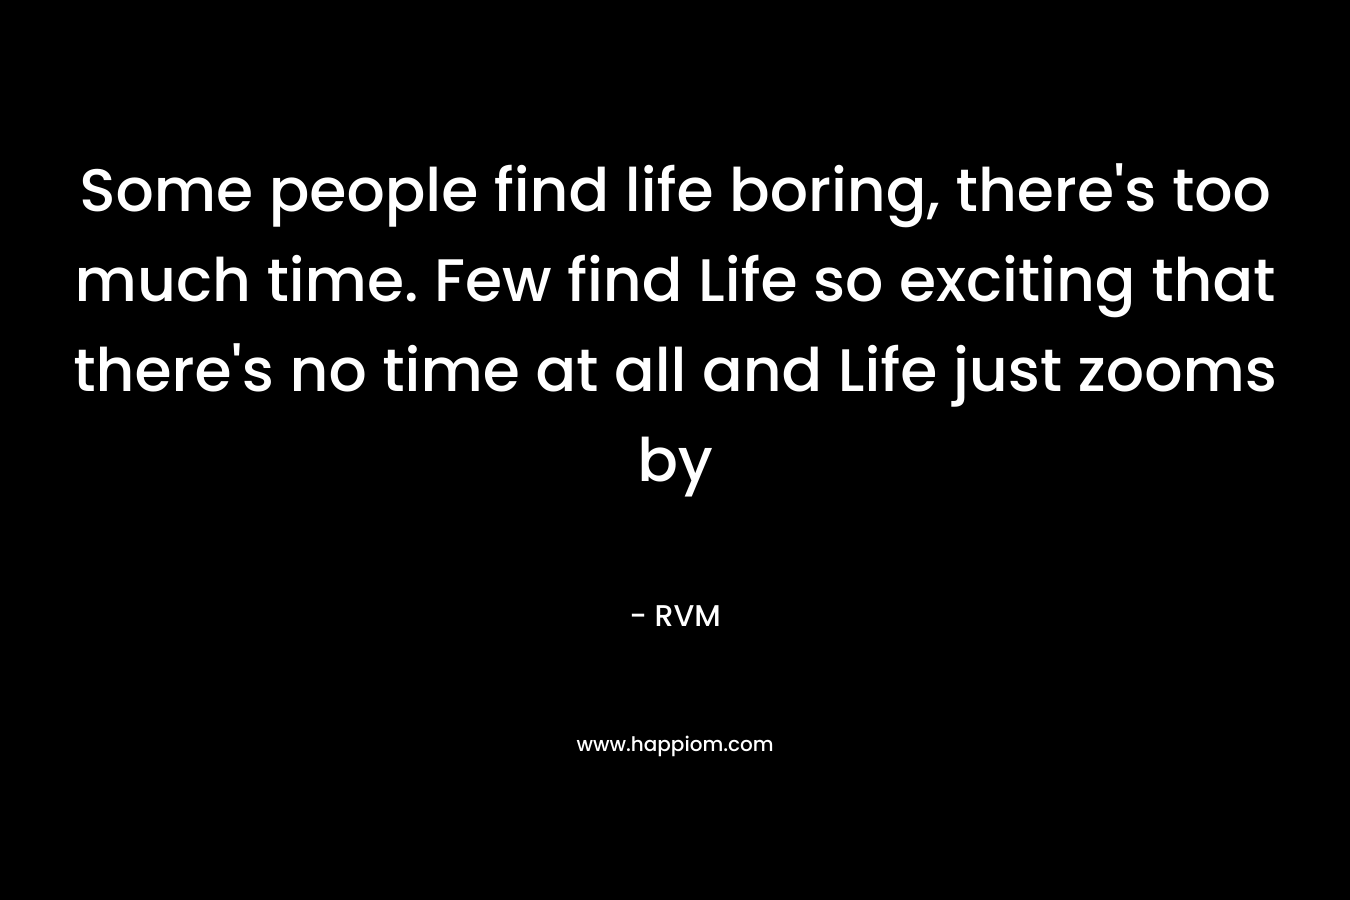 Some people find life boring, there's too much time. Few find Life so exciting that there's no time at all and Life just zooms by